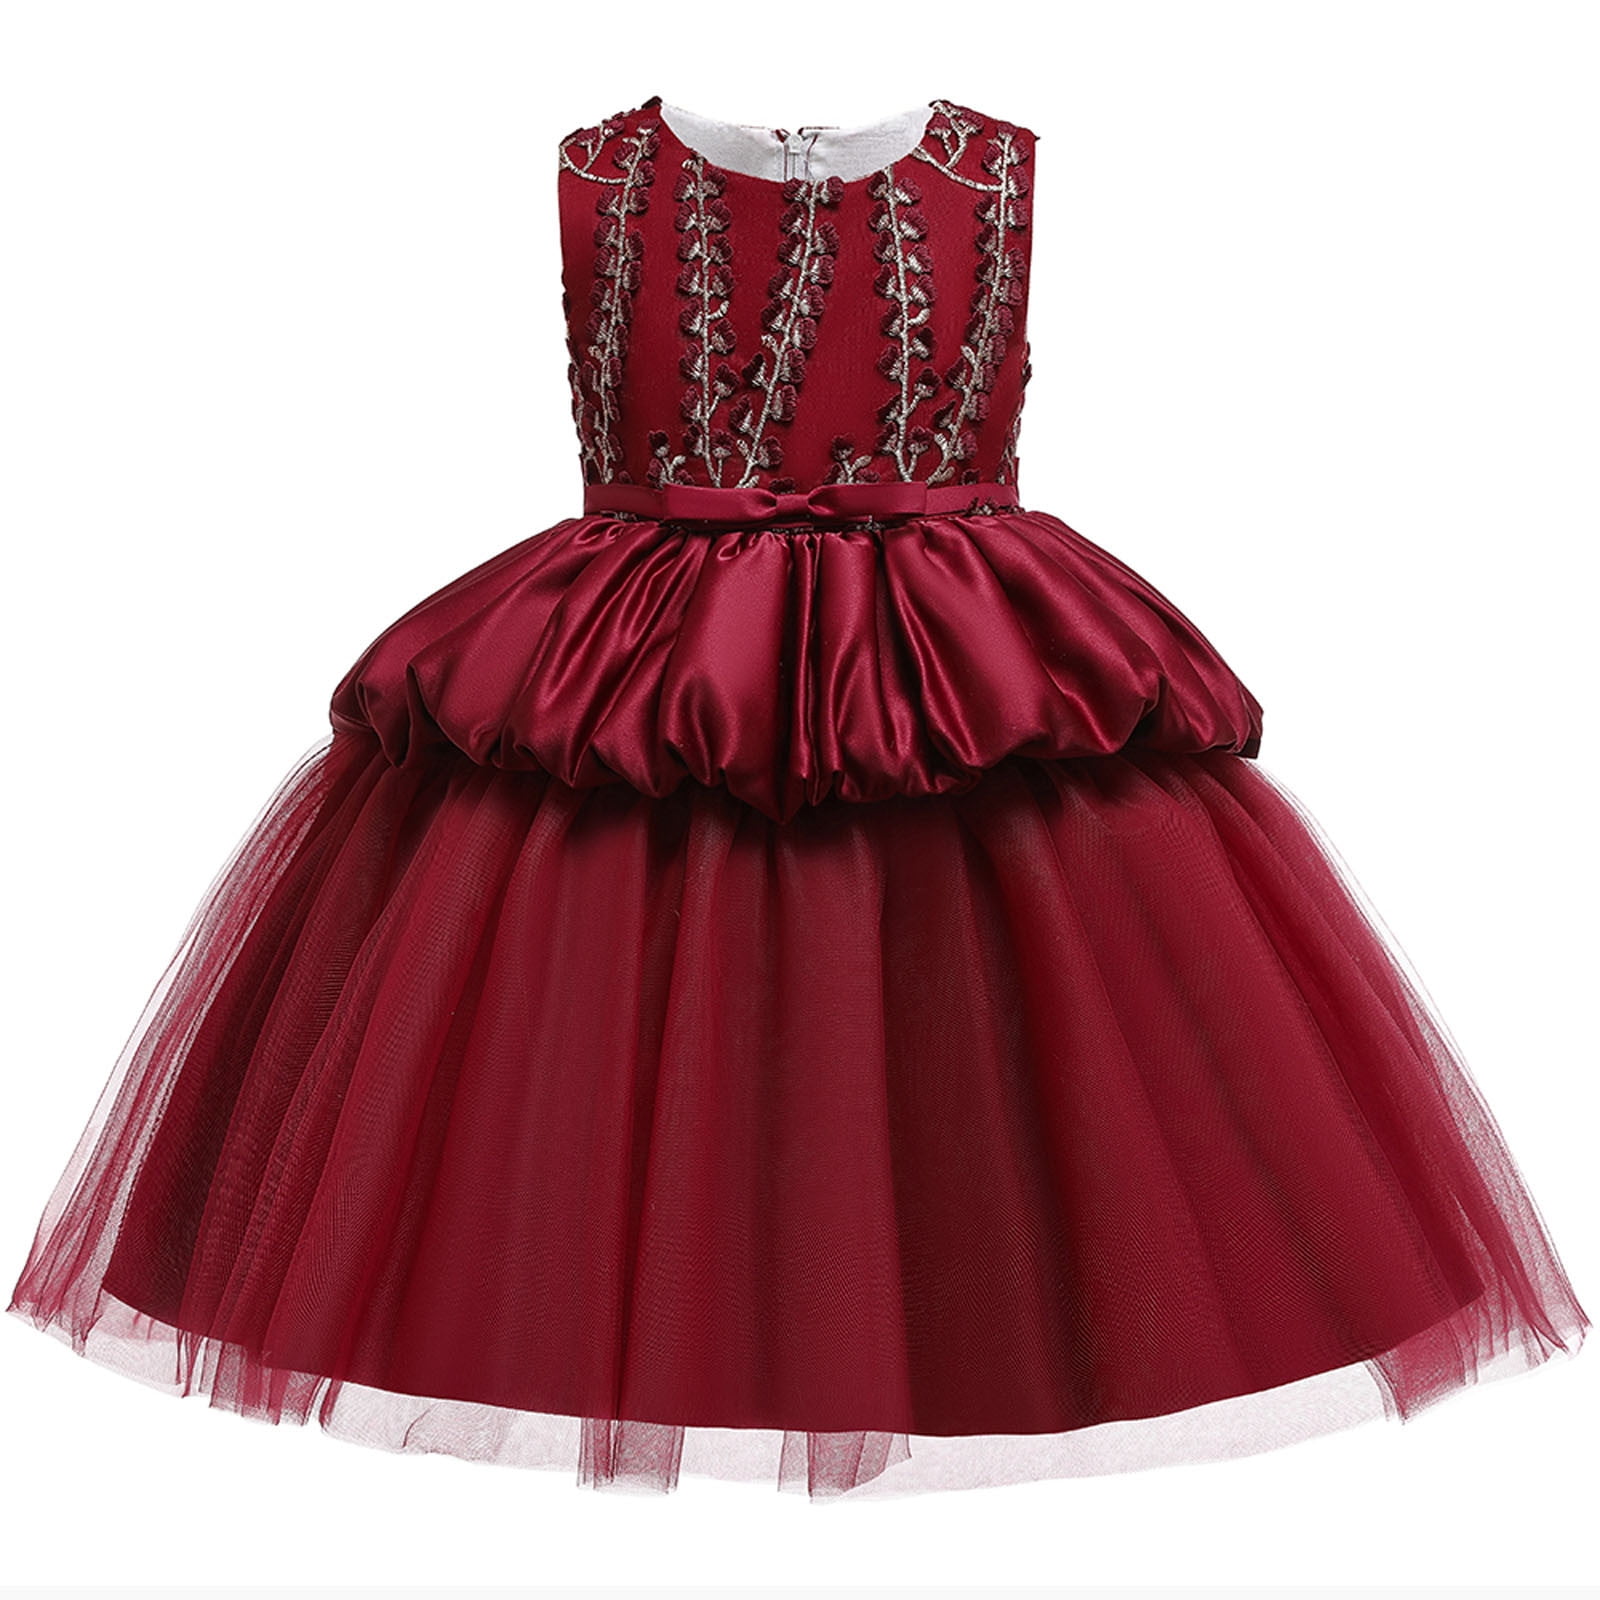 NSSMWTTC Flower Girls Dresses 0-9 Years Baby Toddler Embroidery Formal Dress